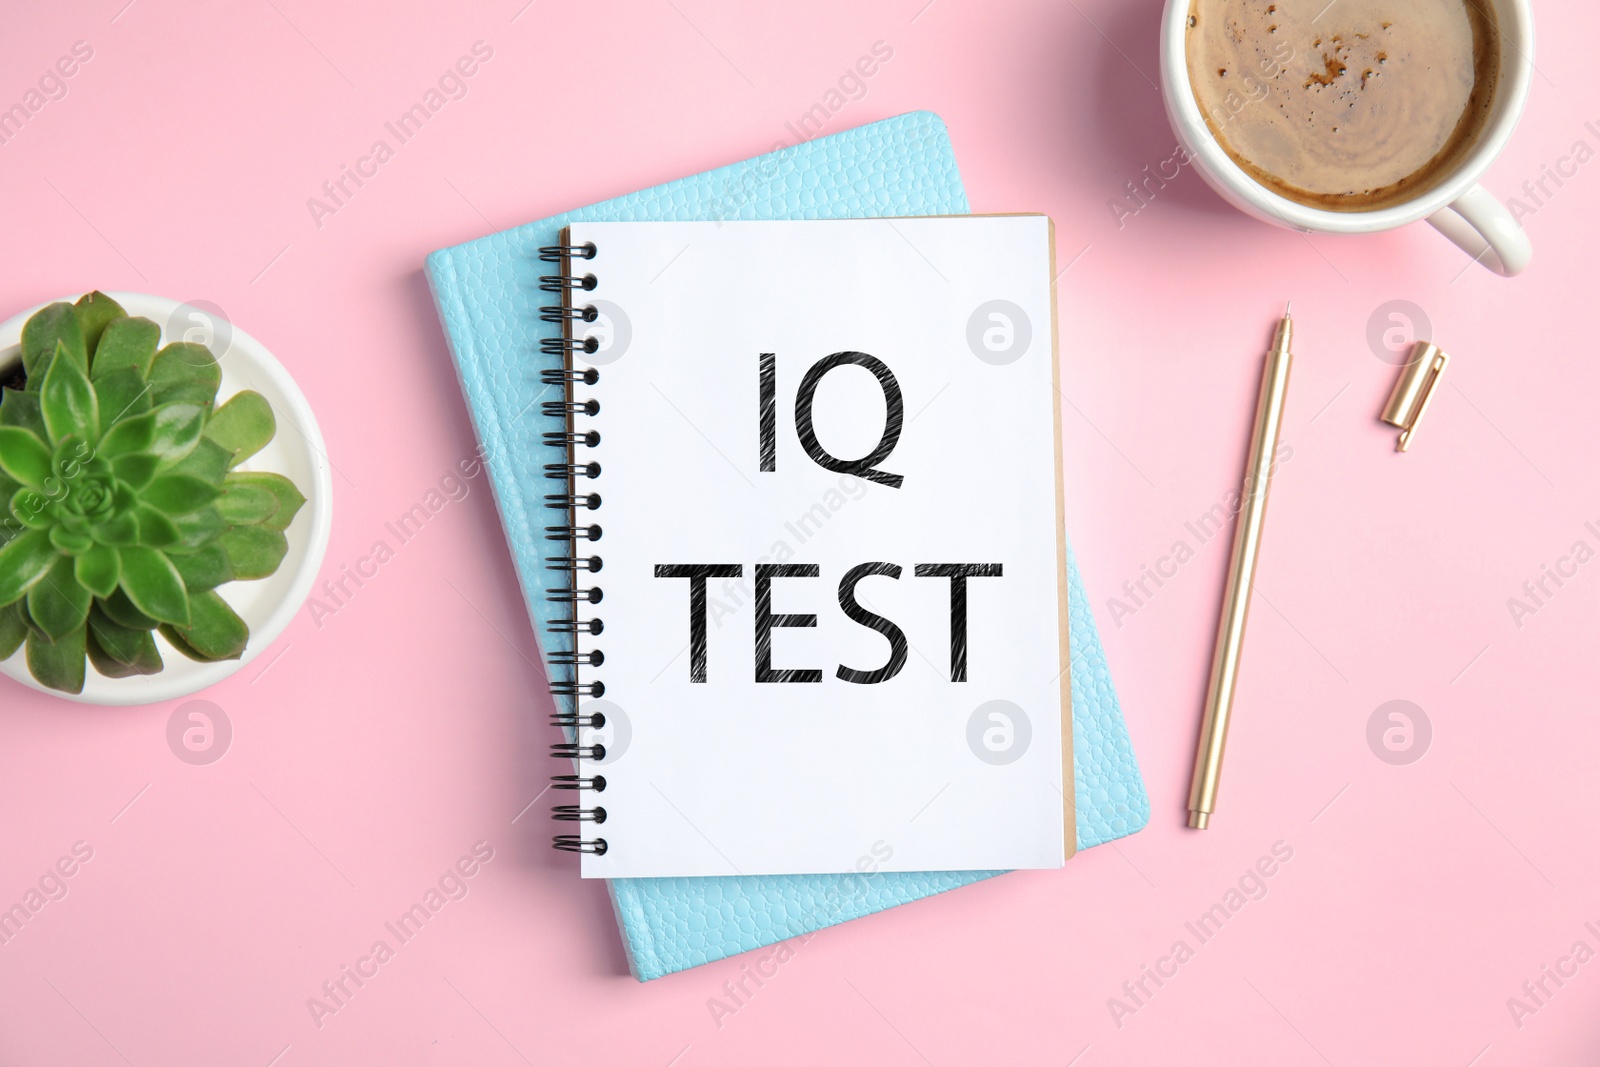 Image of Notebook with text IQ Test, pen, plant and cup of coffee on pink background, flat lay